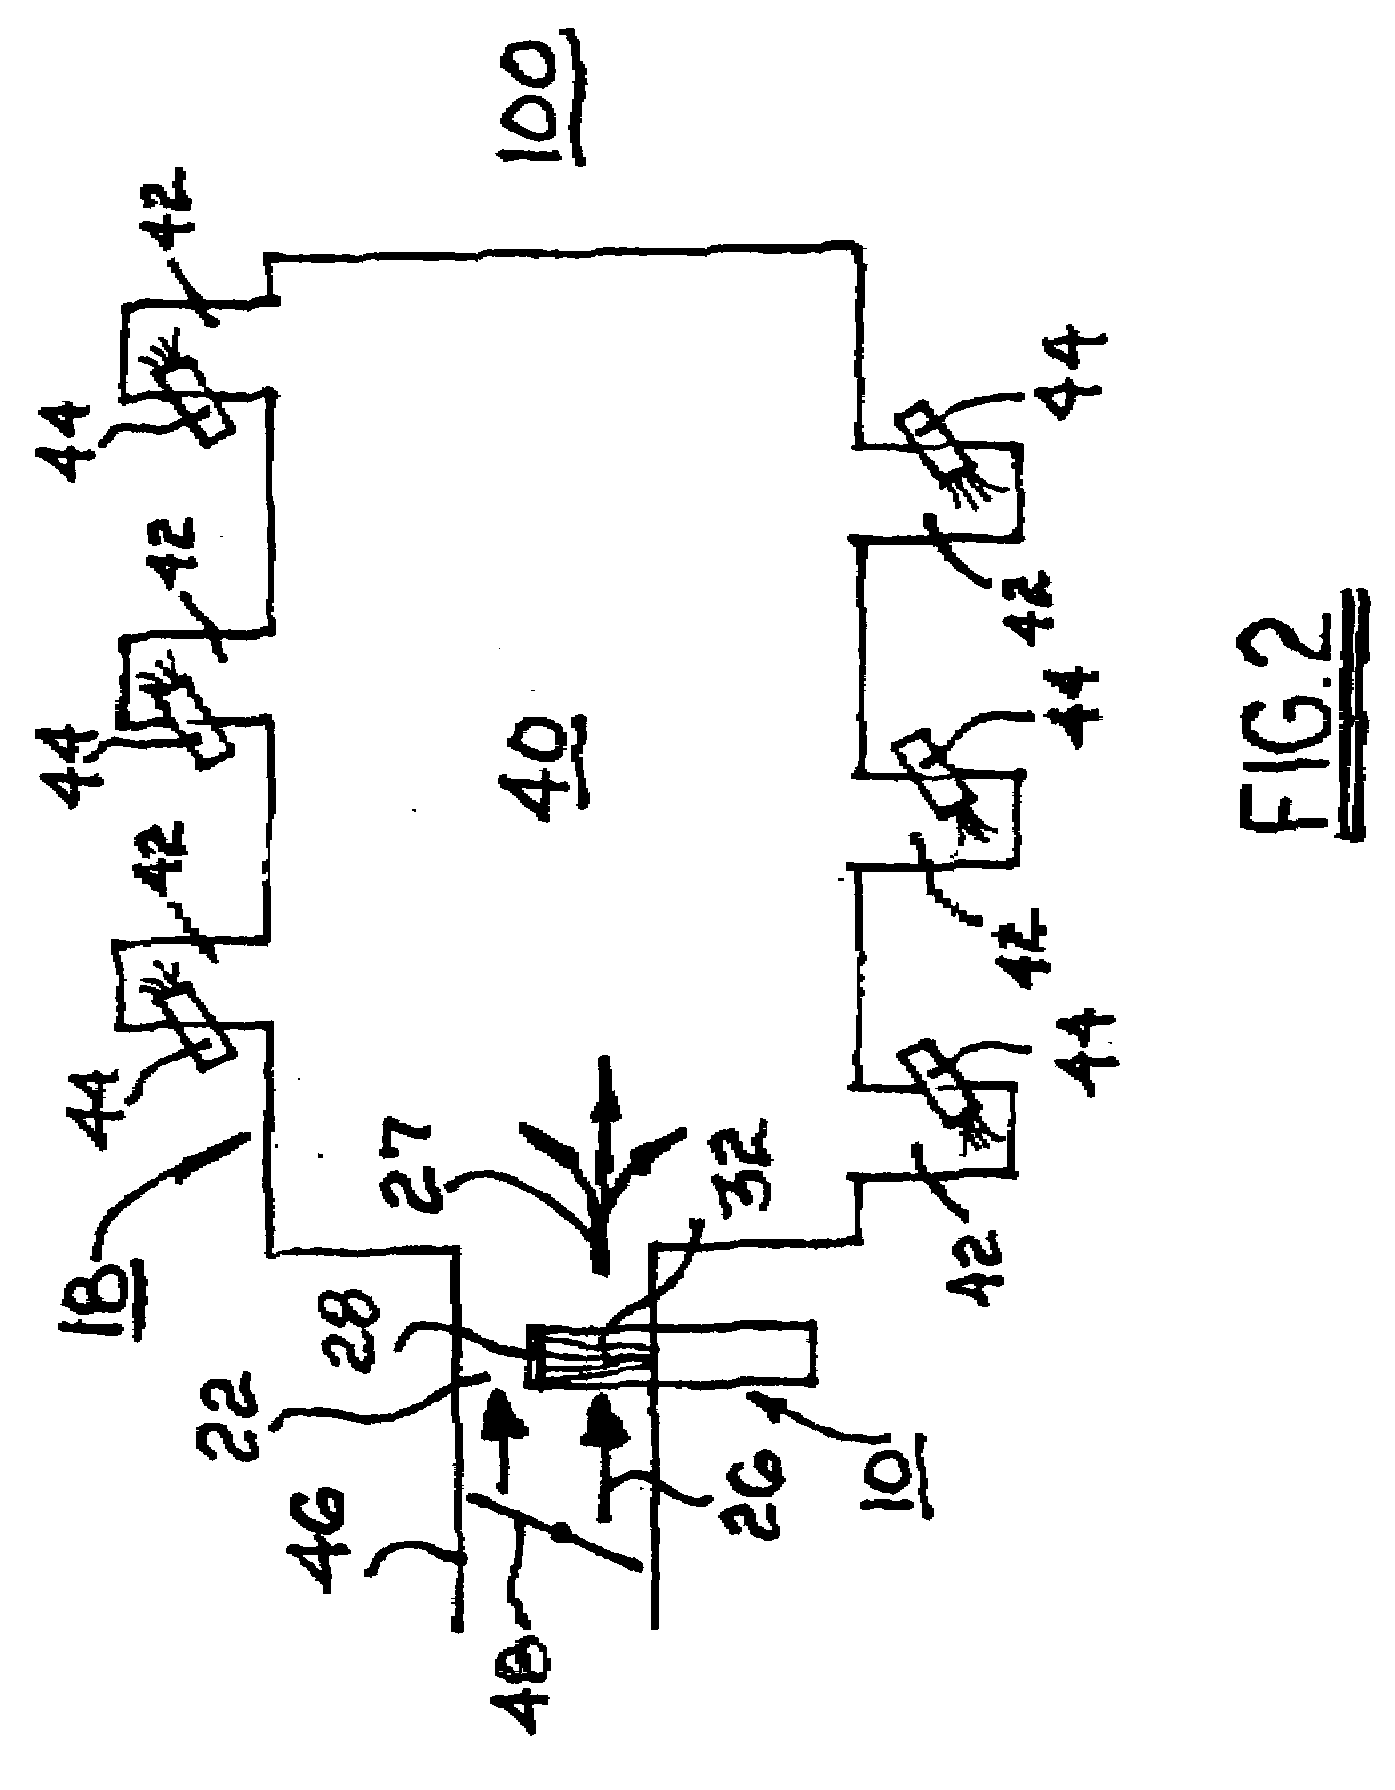 Fuel vapor generator for enhanced cold starting of an internal combustion engine